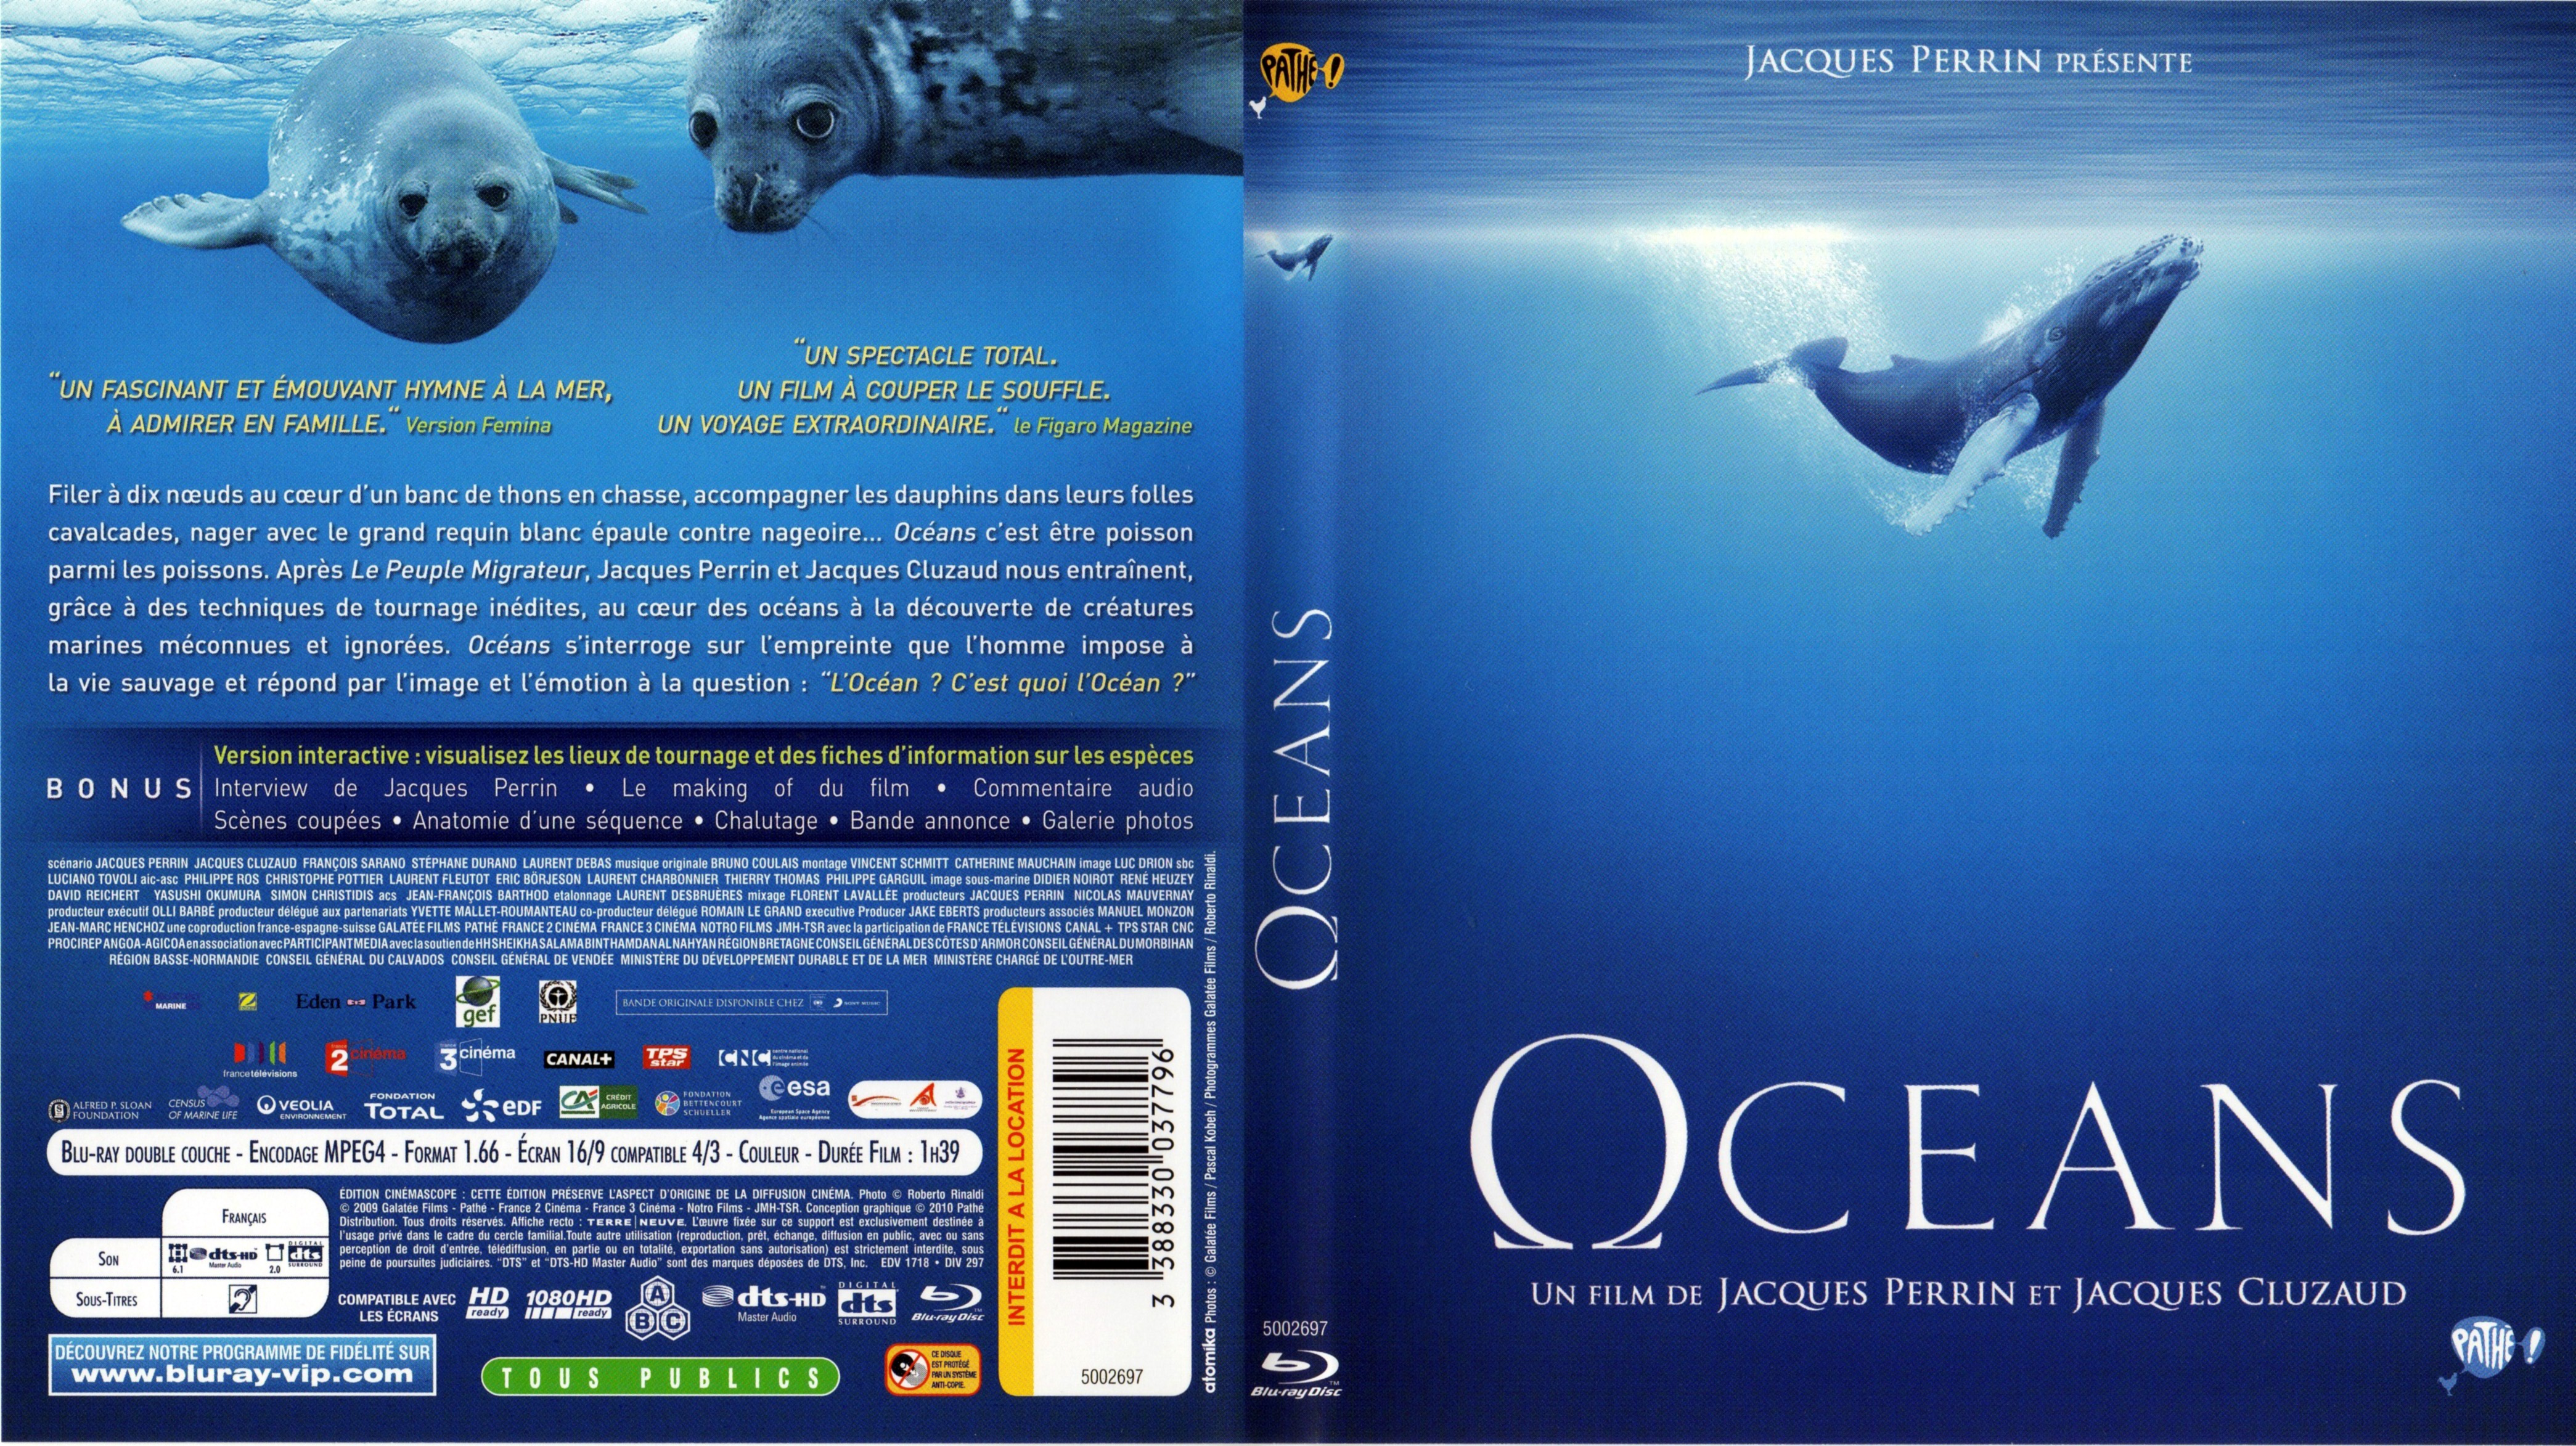 Jaquette DVD Ocans (BLU-RAY)